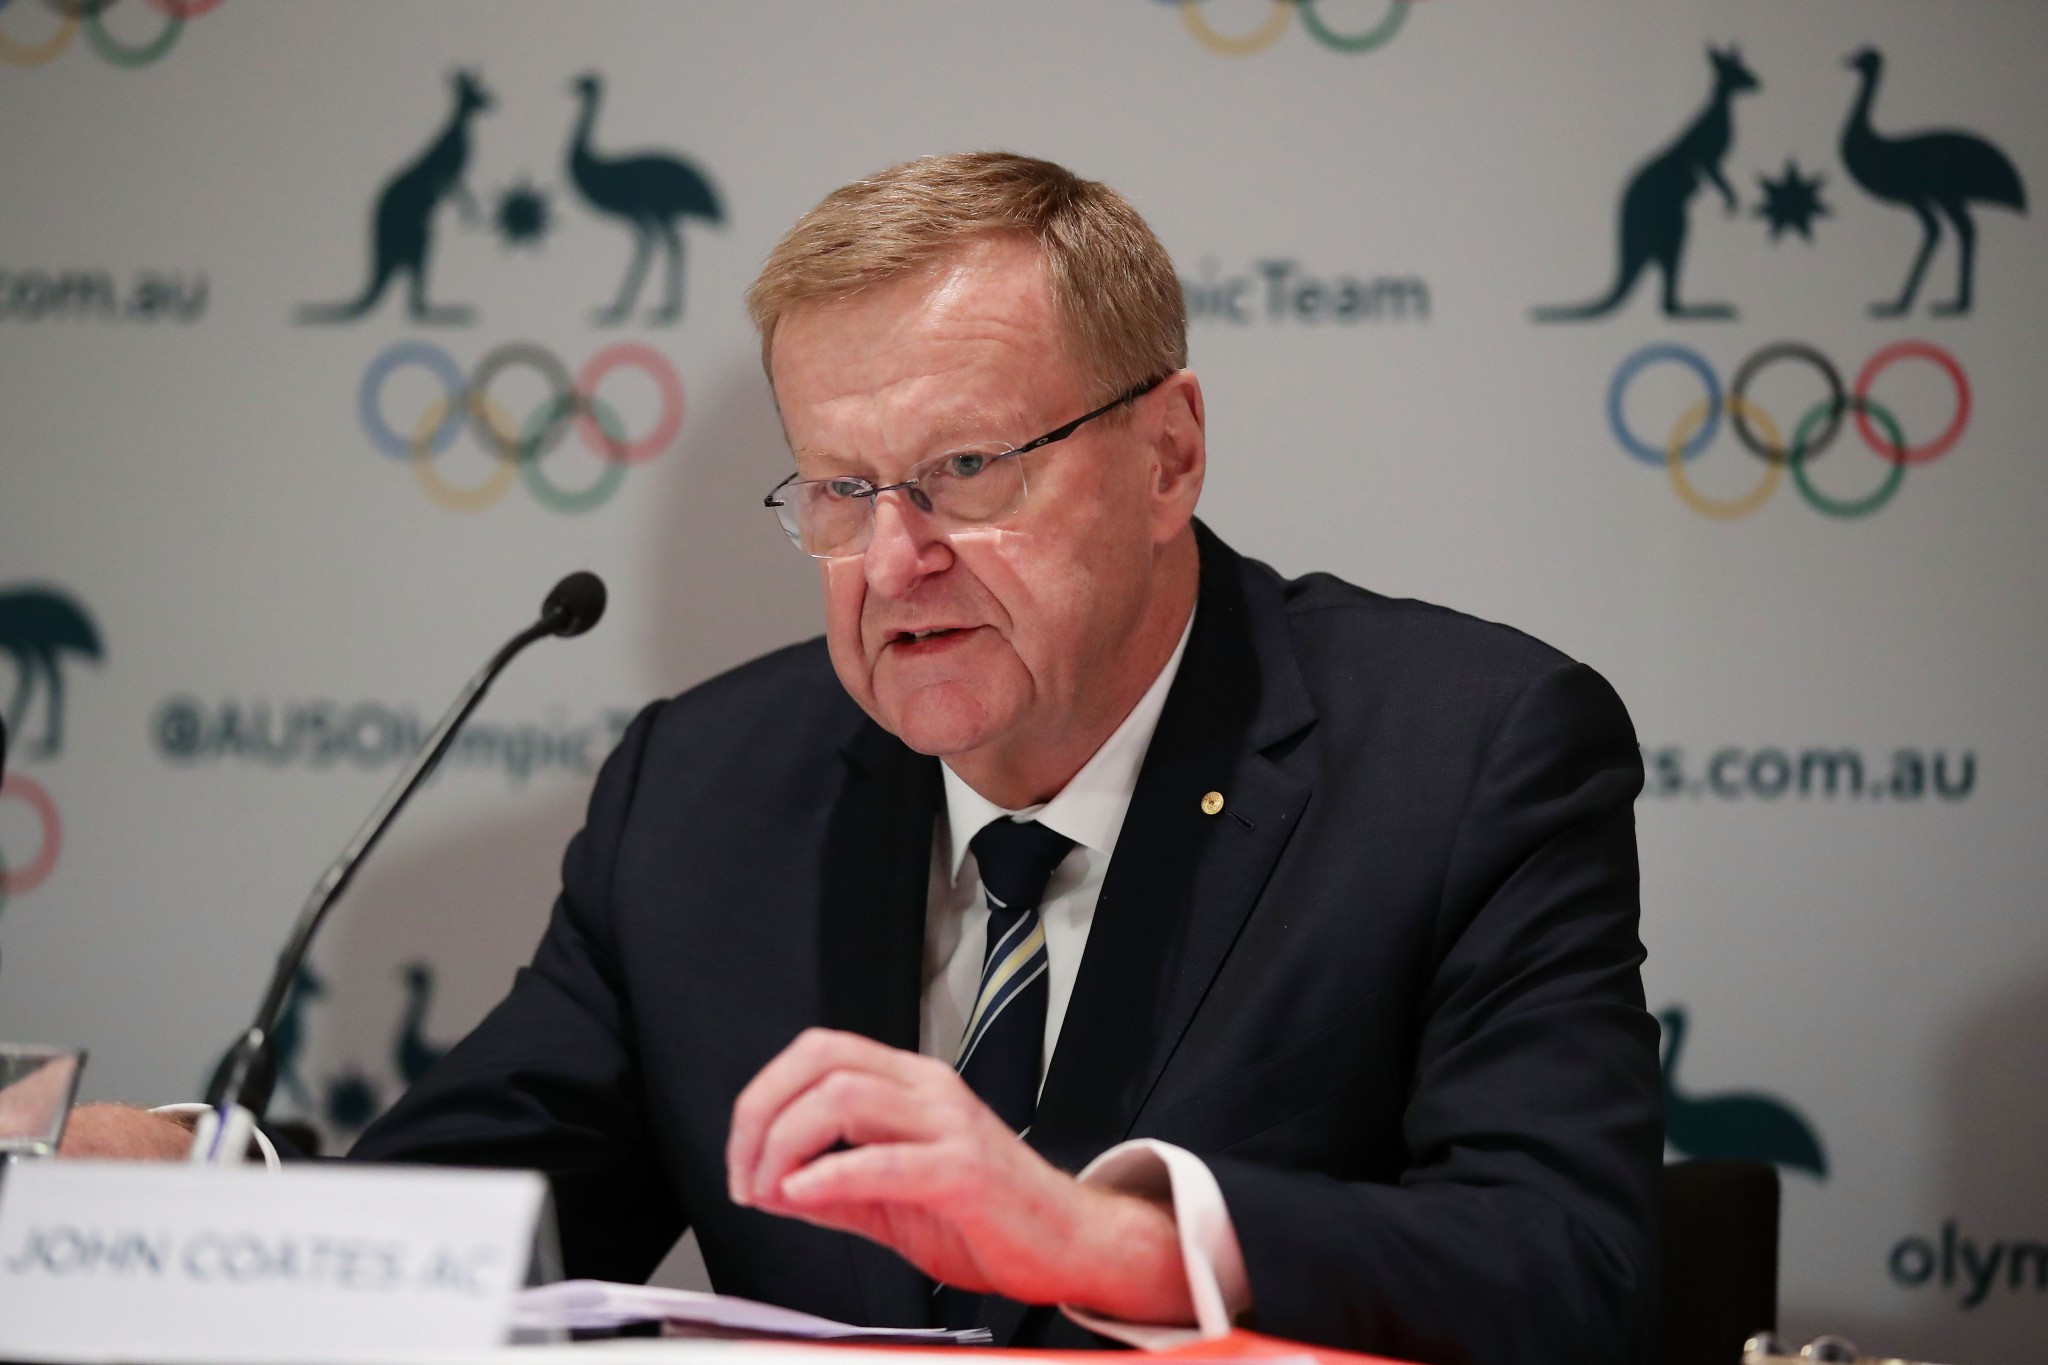 Review calls on Australian Olympic Committee to acknowledge "significant challenges" in workplace culture